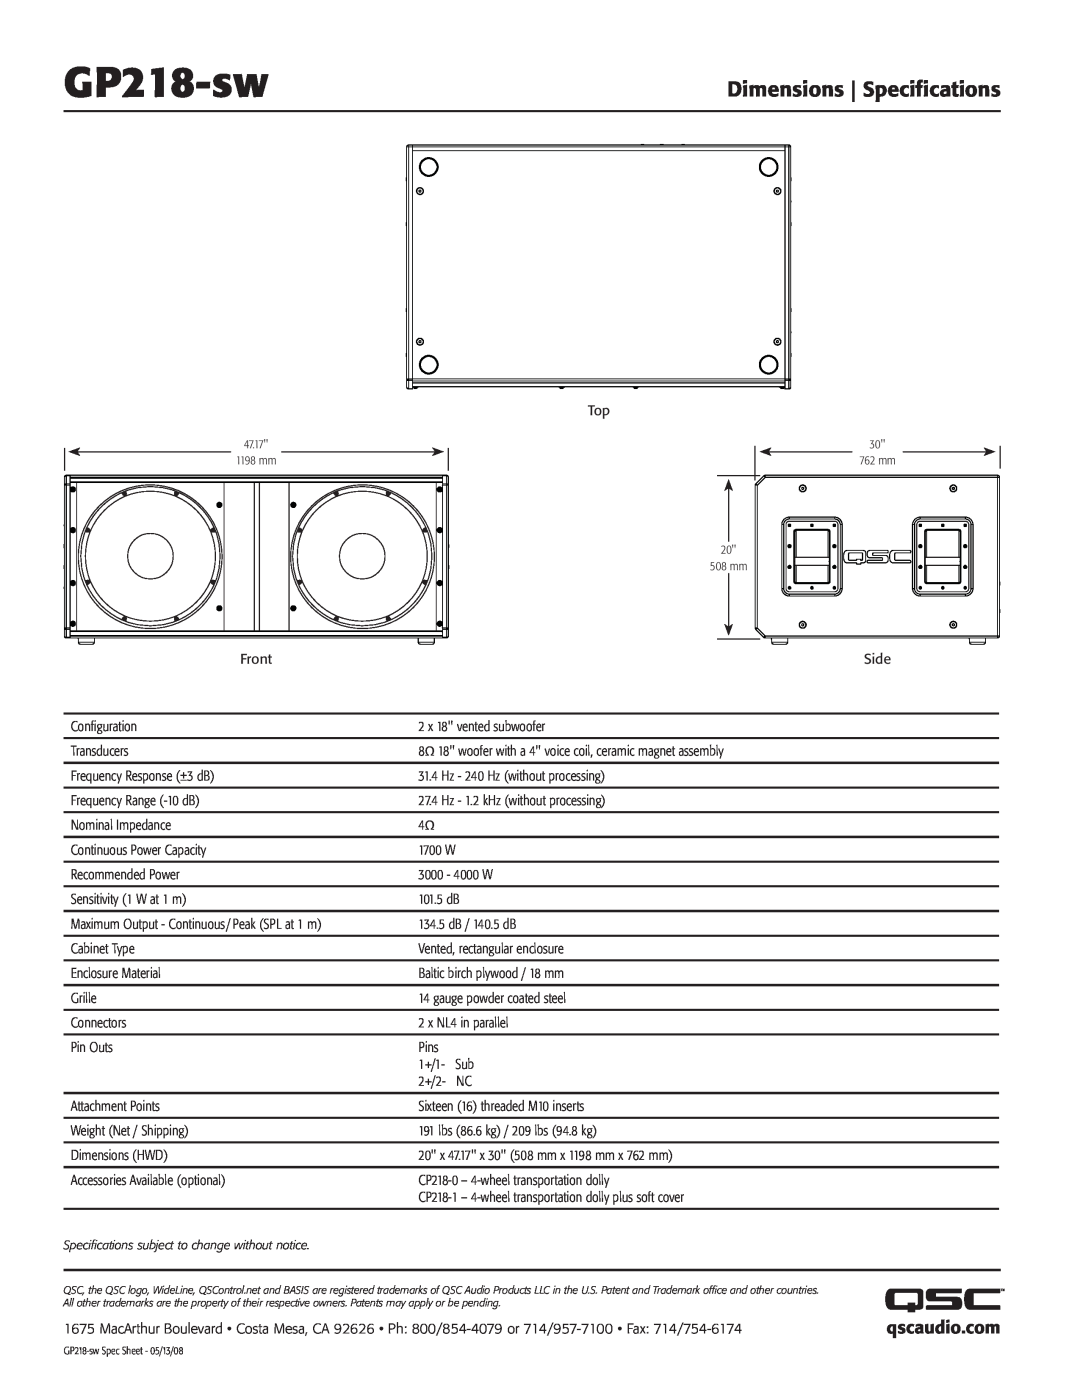 QSC Audio GP218-sw manual Dimensions Specifications 